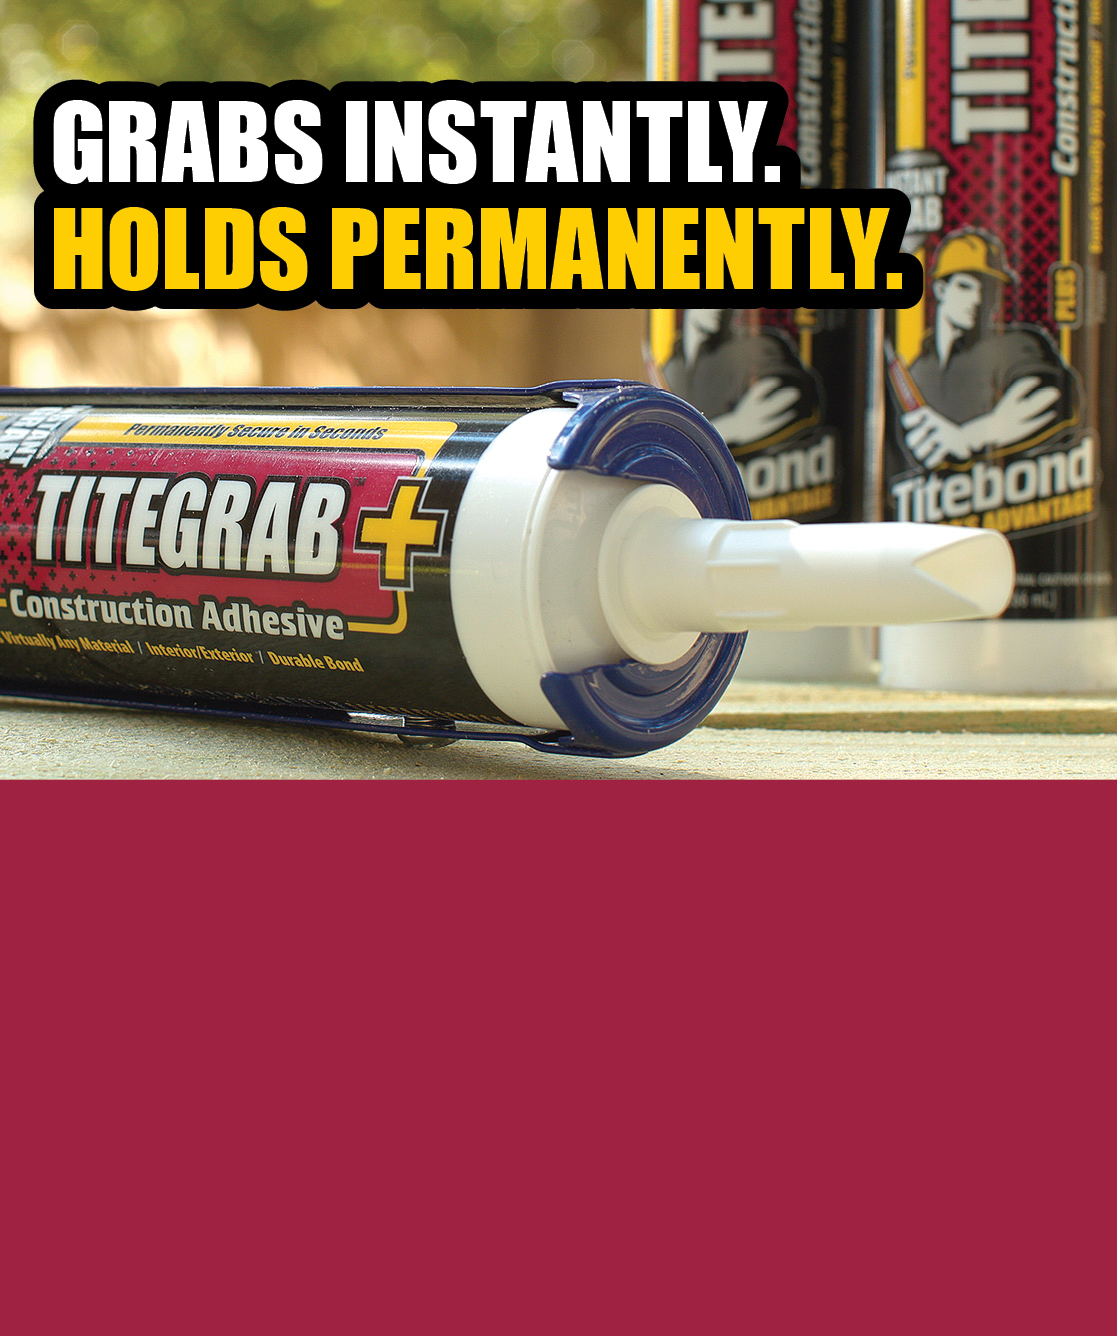 TiteGrab Plus Cartridge - Grabs Instantly. Holds Permanently.